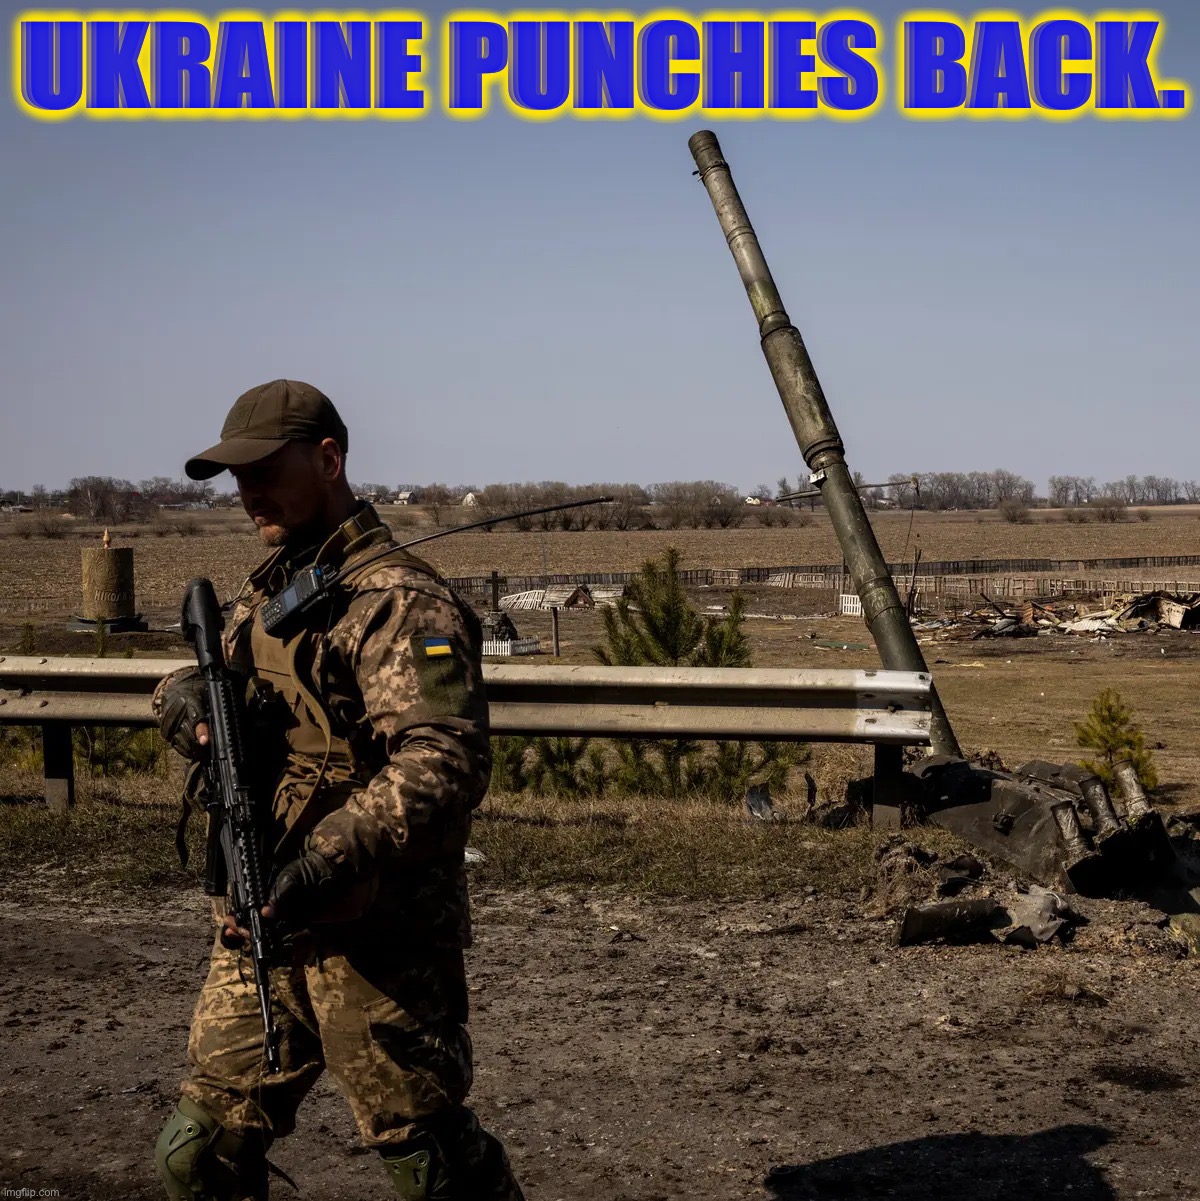 A Ukrainian soldier patrols near the remnants of a Russian T-90 tank, destroyed by a U.S.-made Javelin missile. | UKRAINE PUNCHES BACK. | image tagged in ukrainian soldier,ukraine,ukrainian,ukrainian lives matter,war,soldier | made w/ Imgflip meme maker